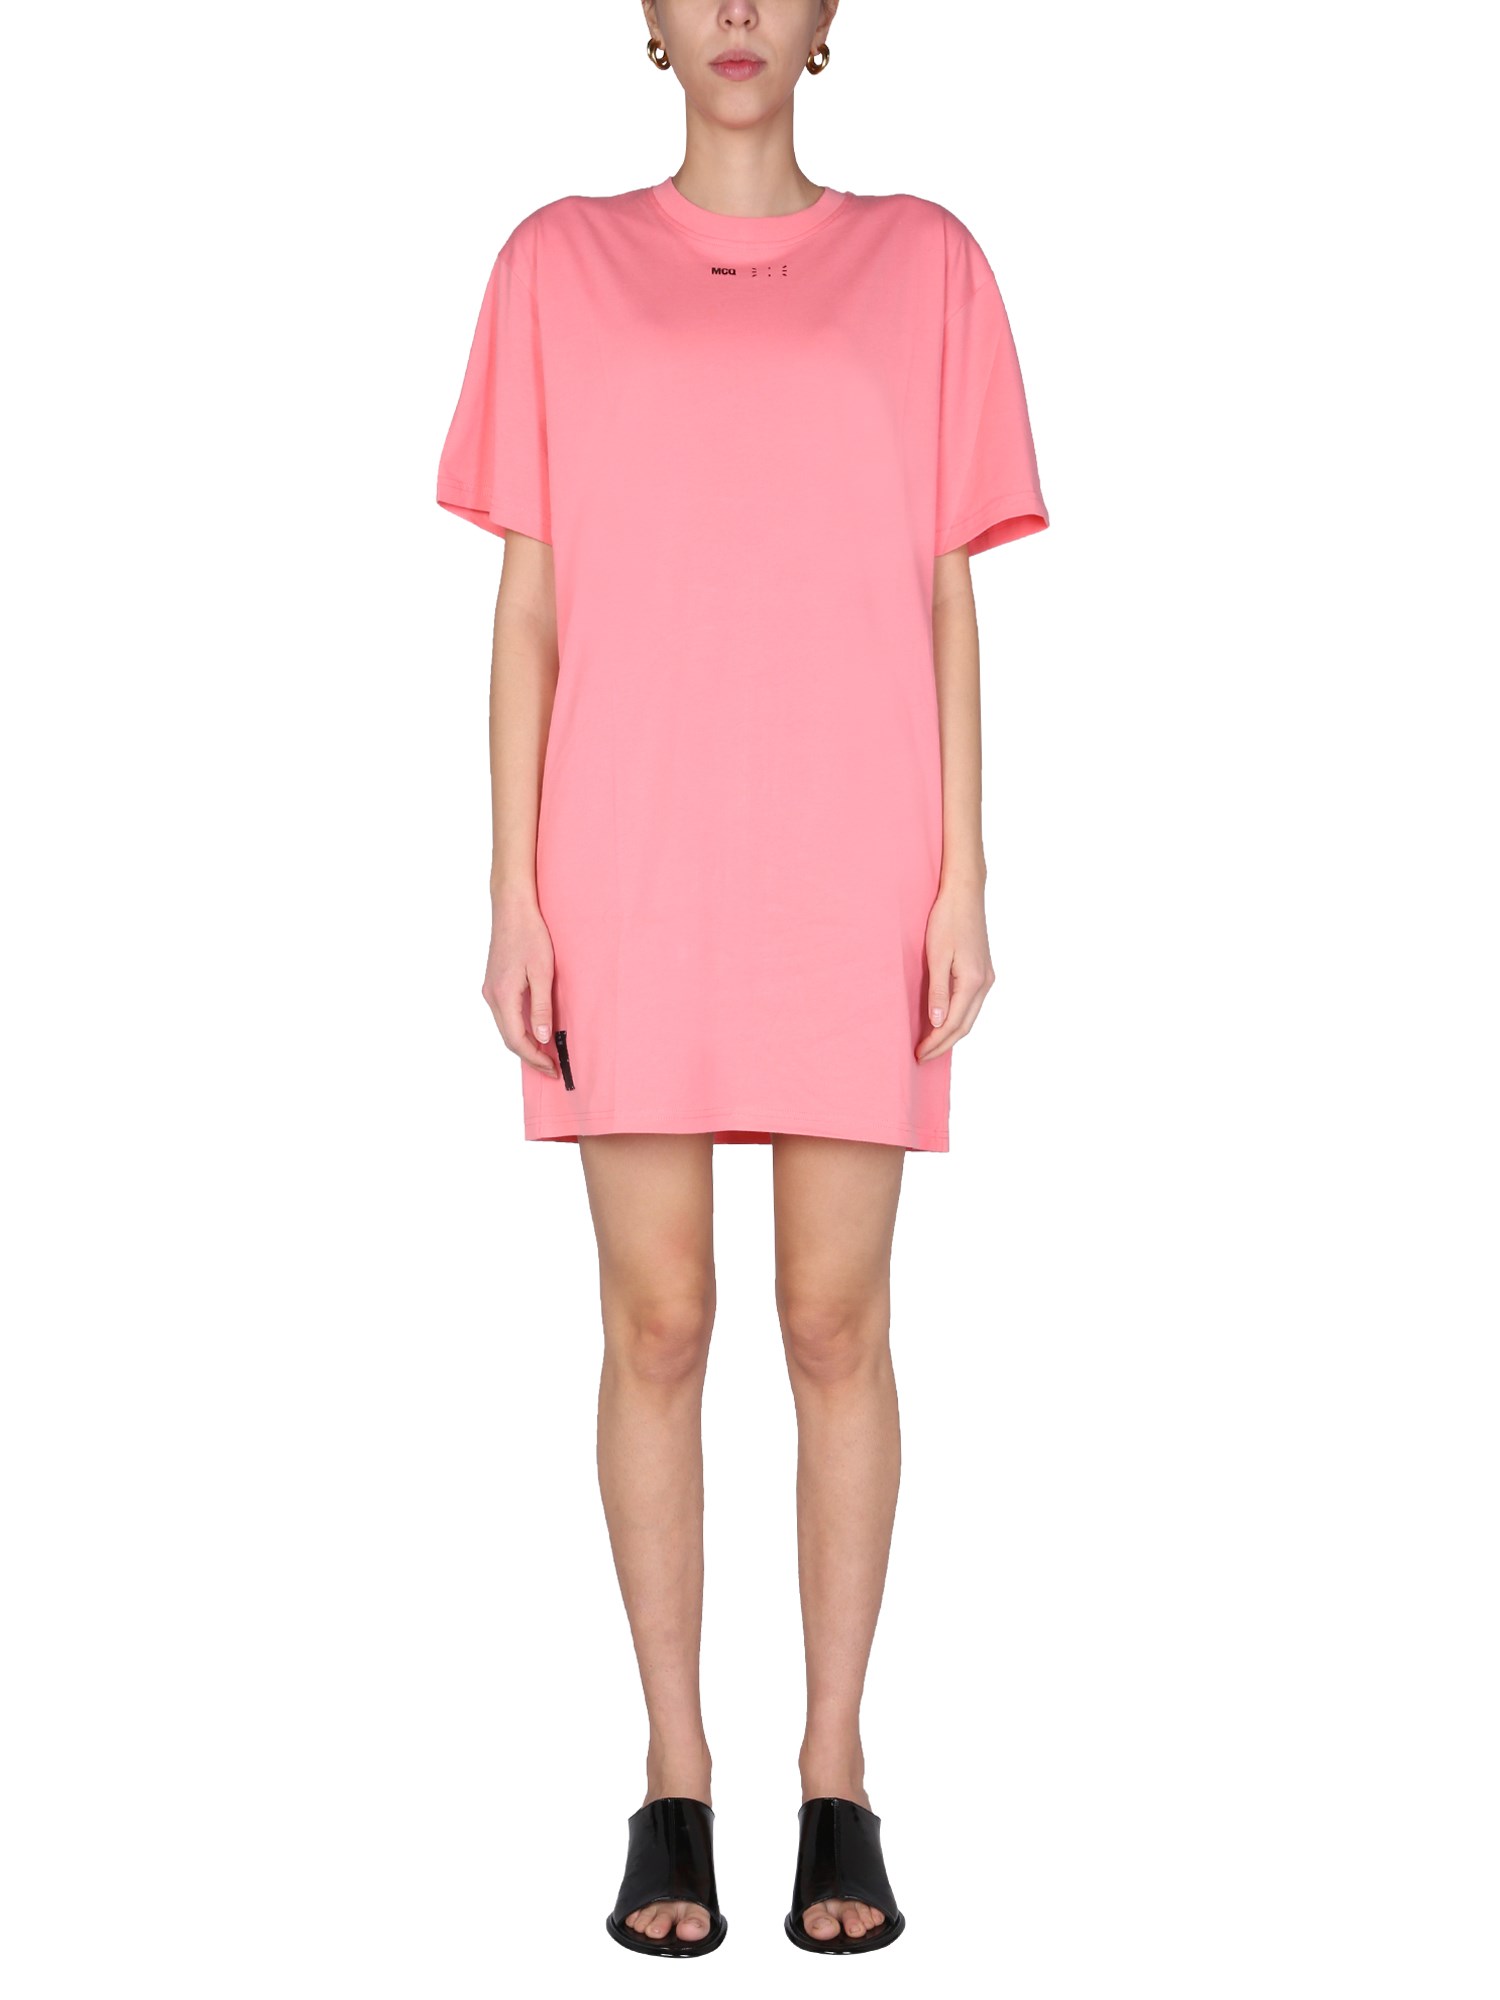 mcq relaxed fit dress